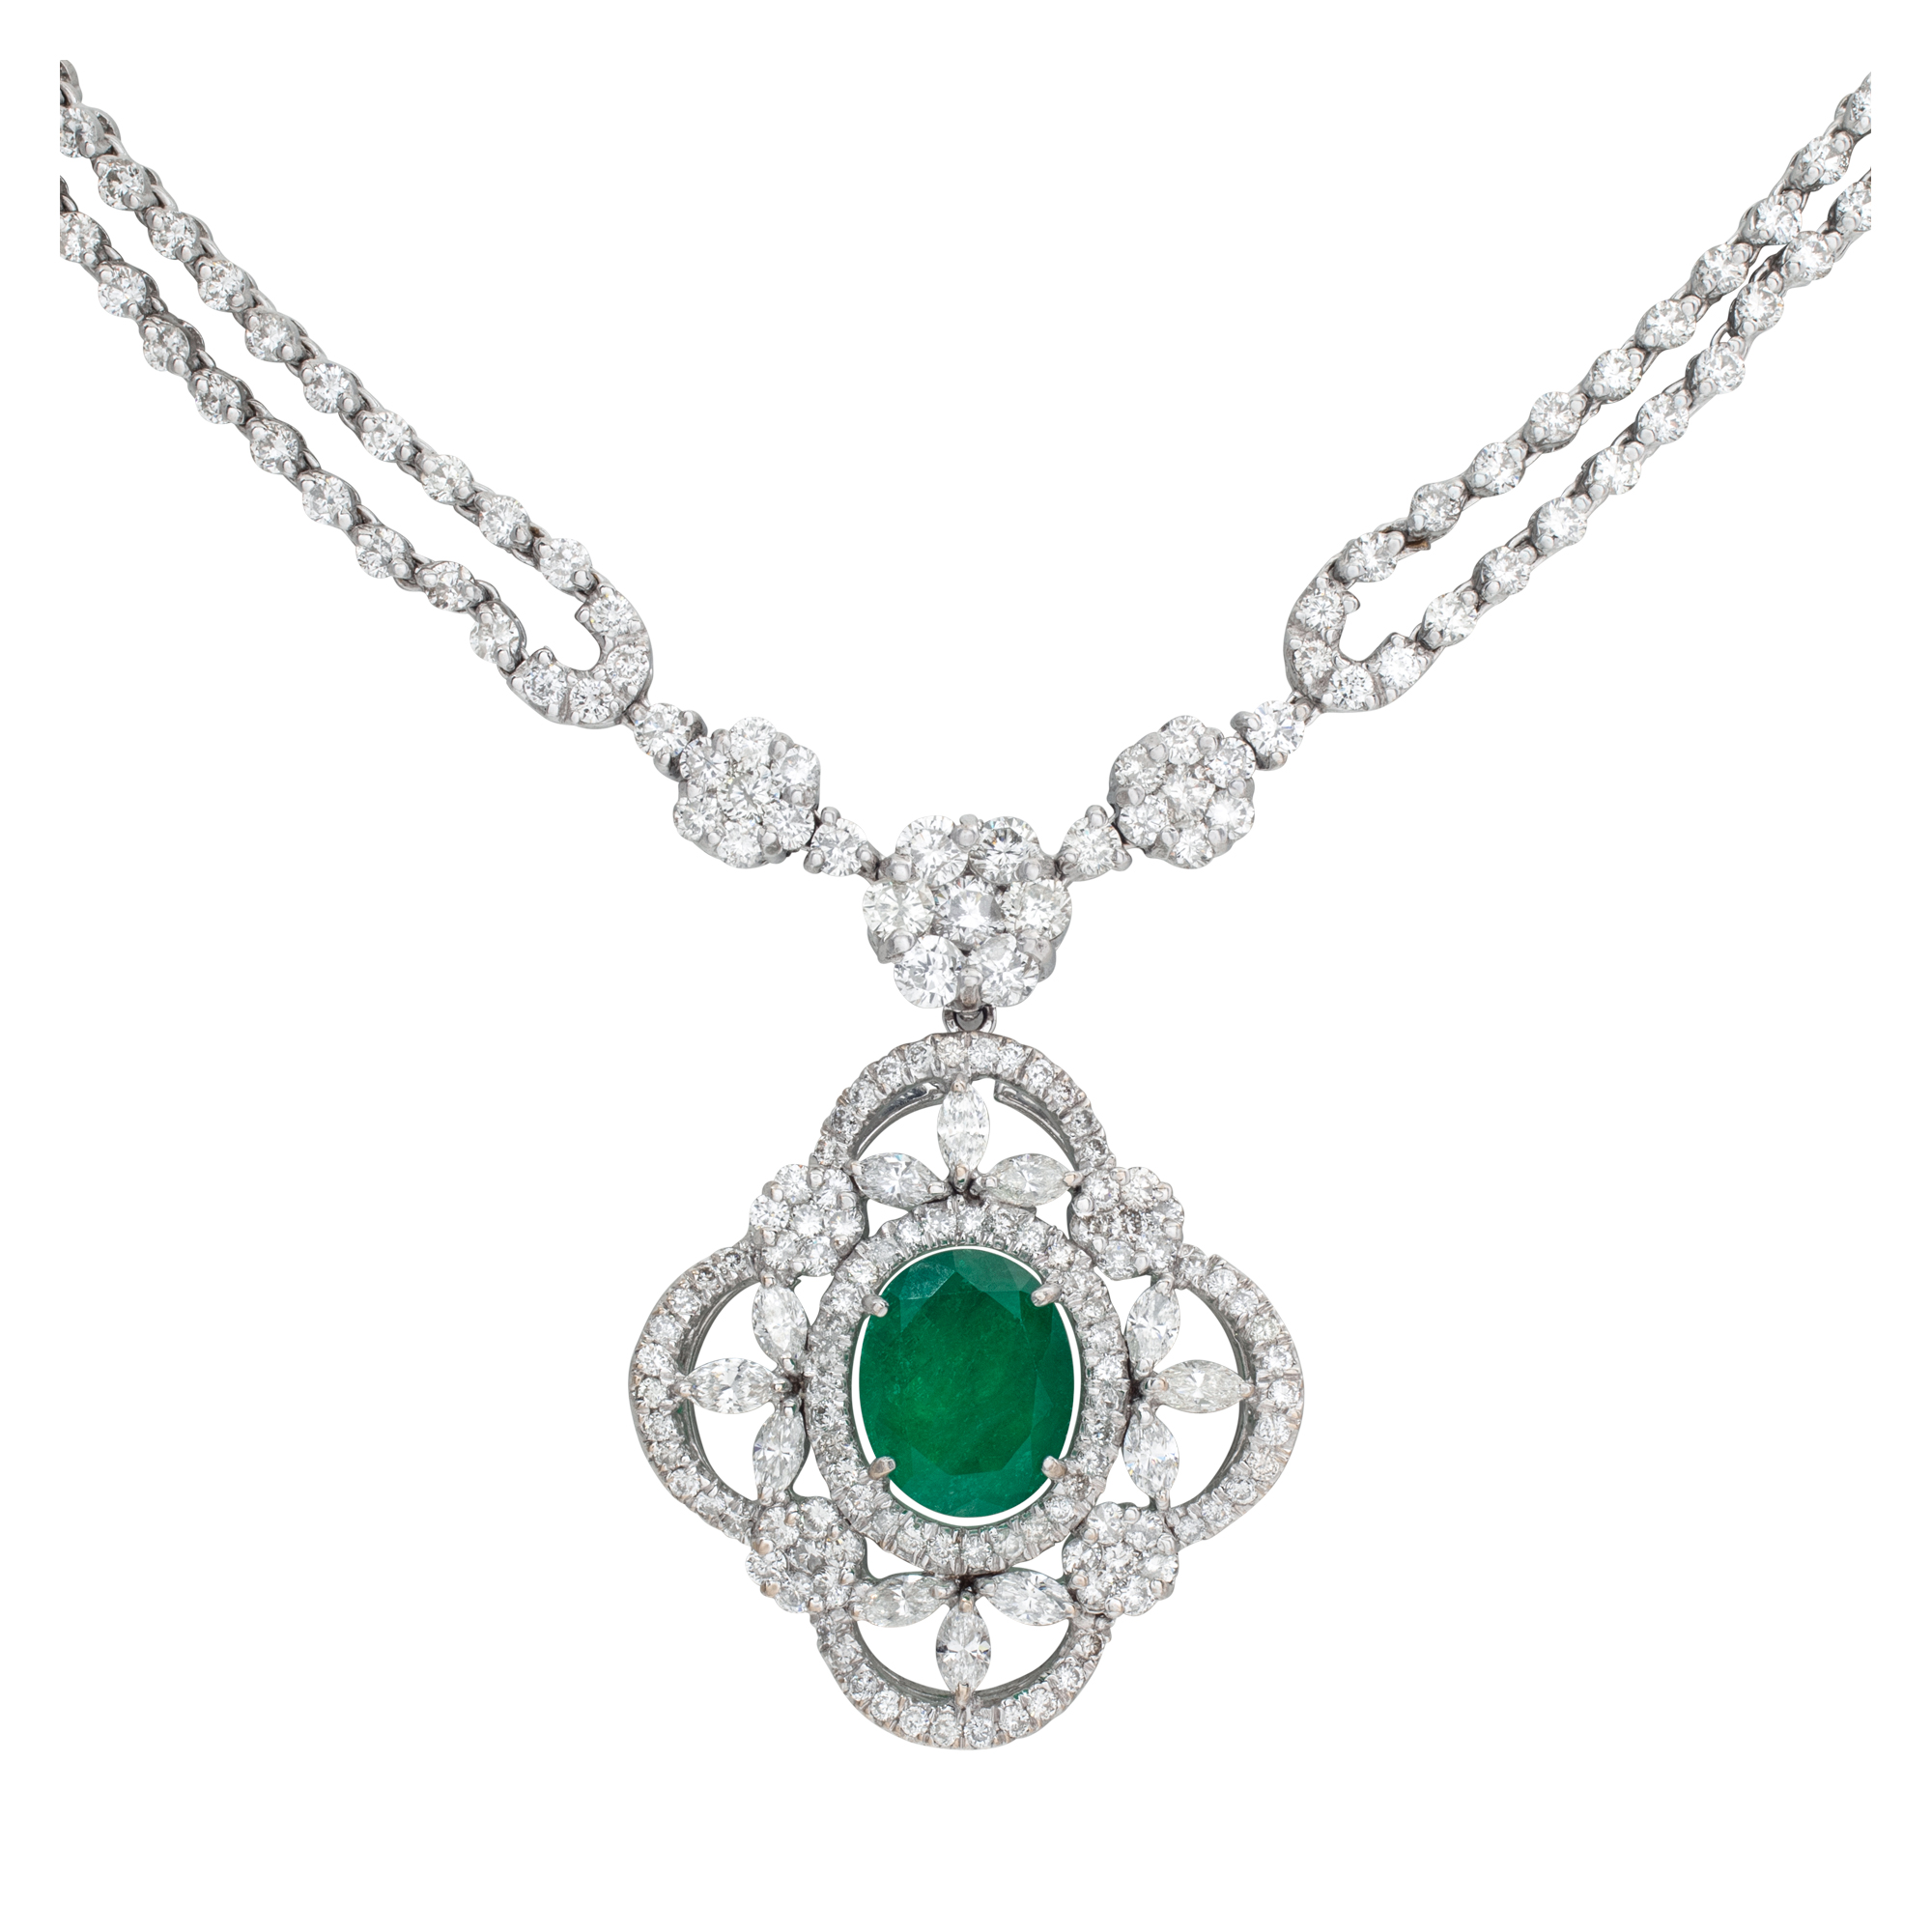 Magnificent oval shape 2.40 carat Colombian emerald and 12.40 carat diamonds necklace set in 18k white gold. image 1